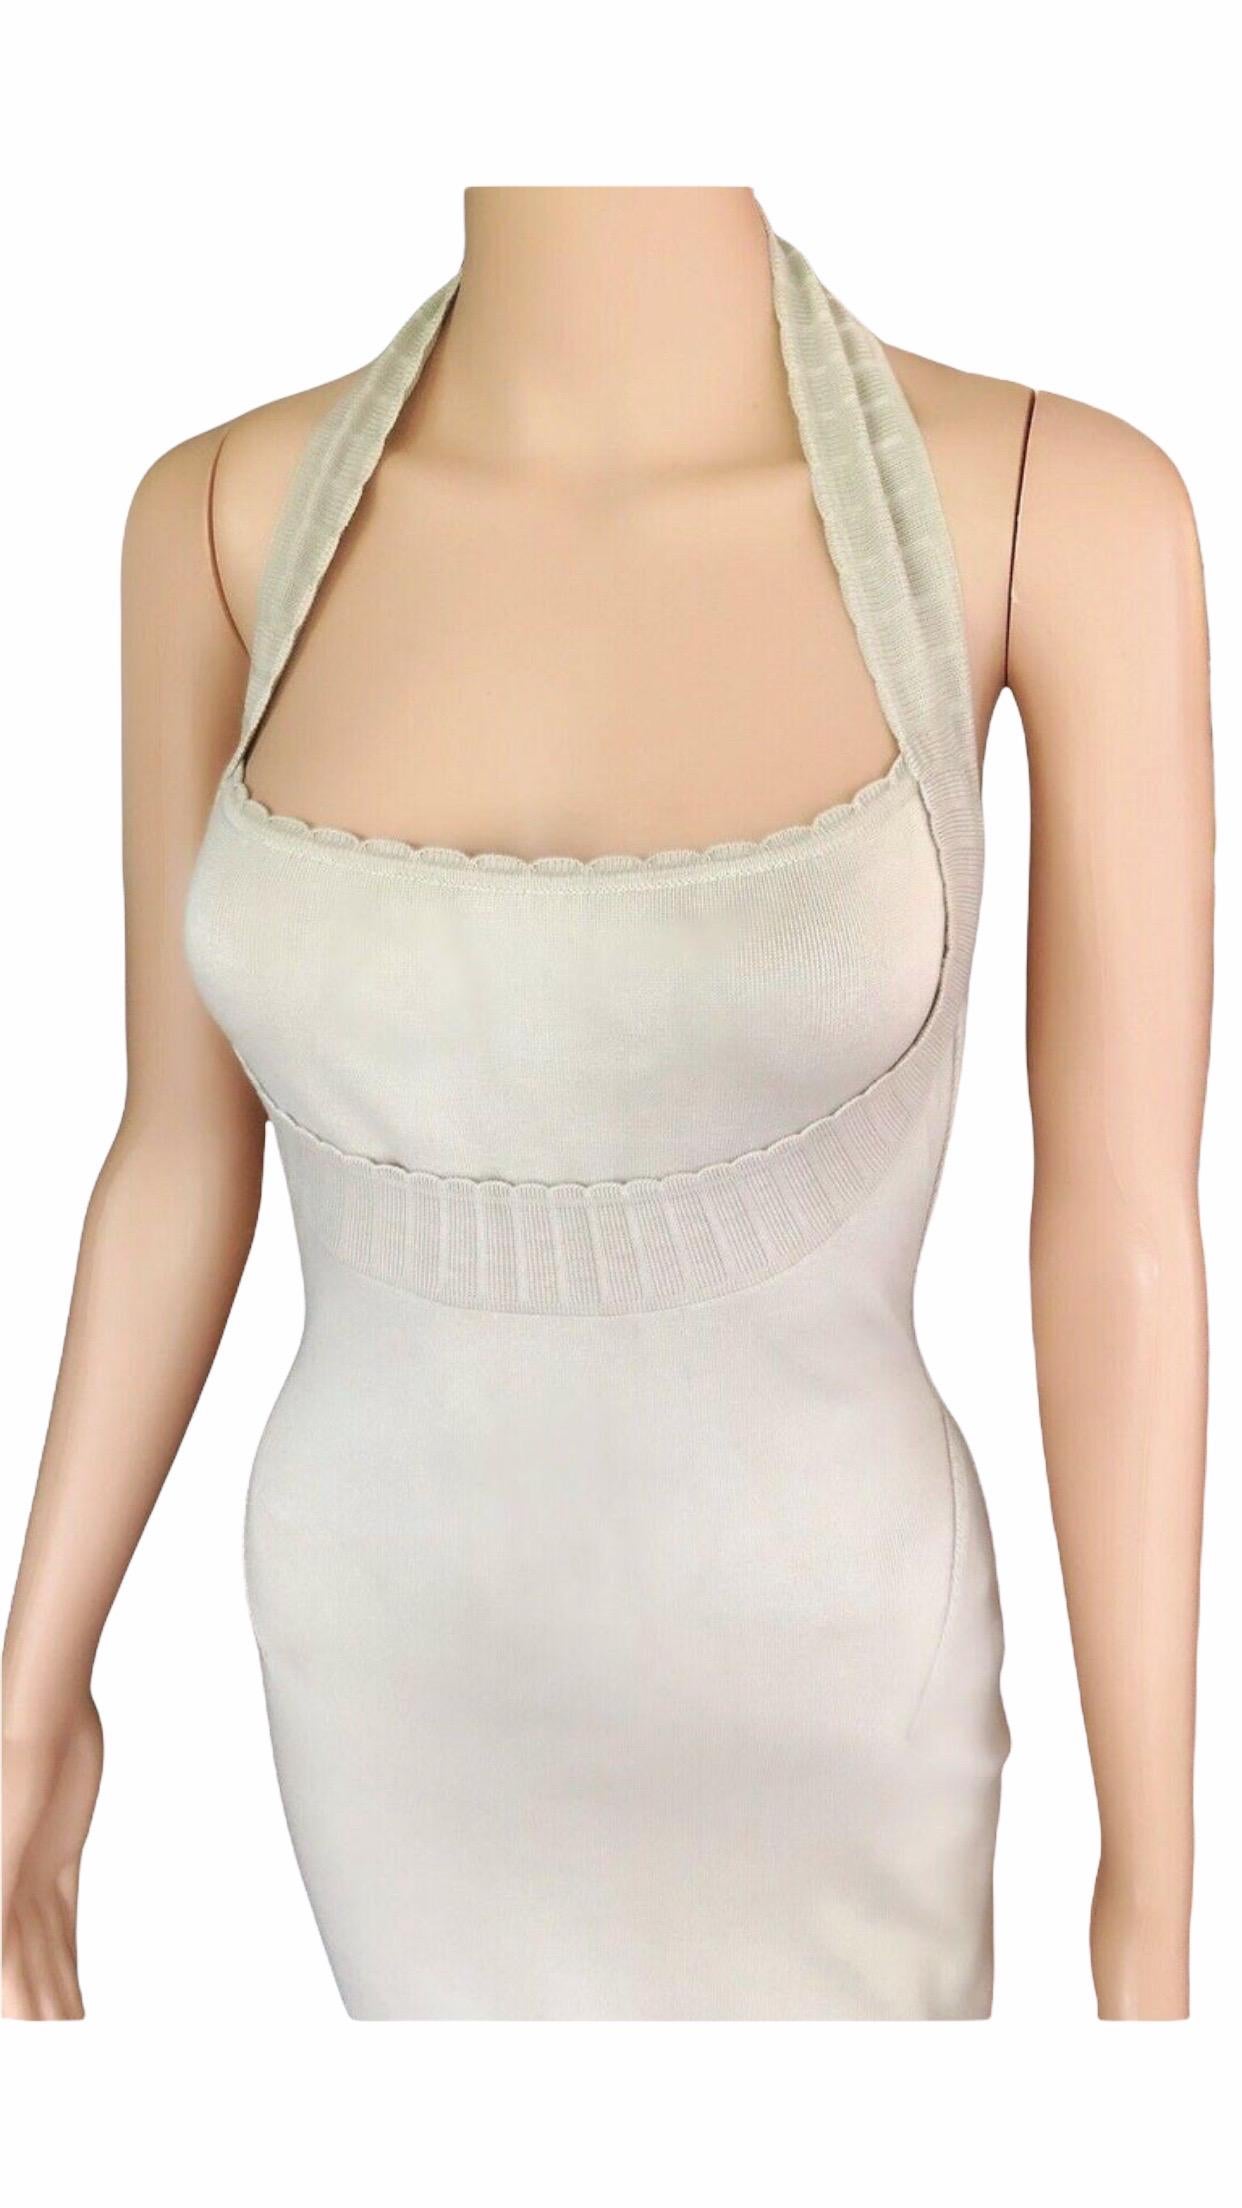 Azzedine Alaia S/S 1992 Vintage Bustier Open Back Dress  In Good Condition For Sale In Naples, FL